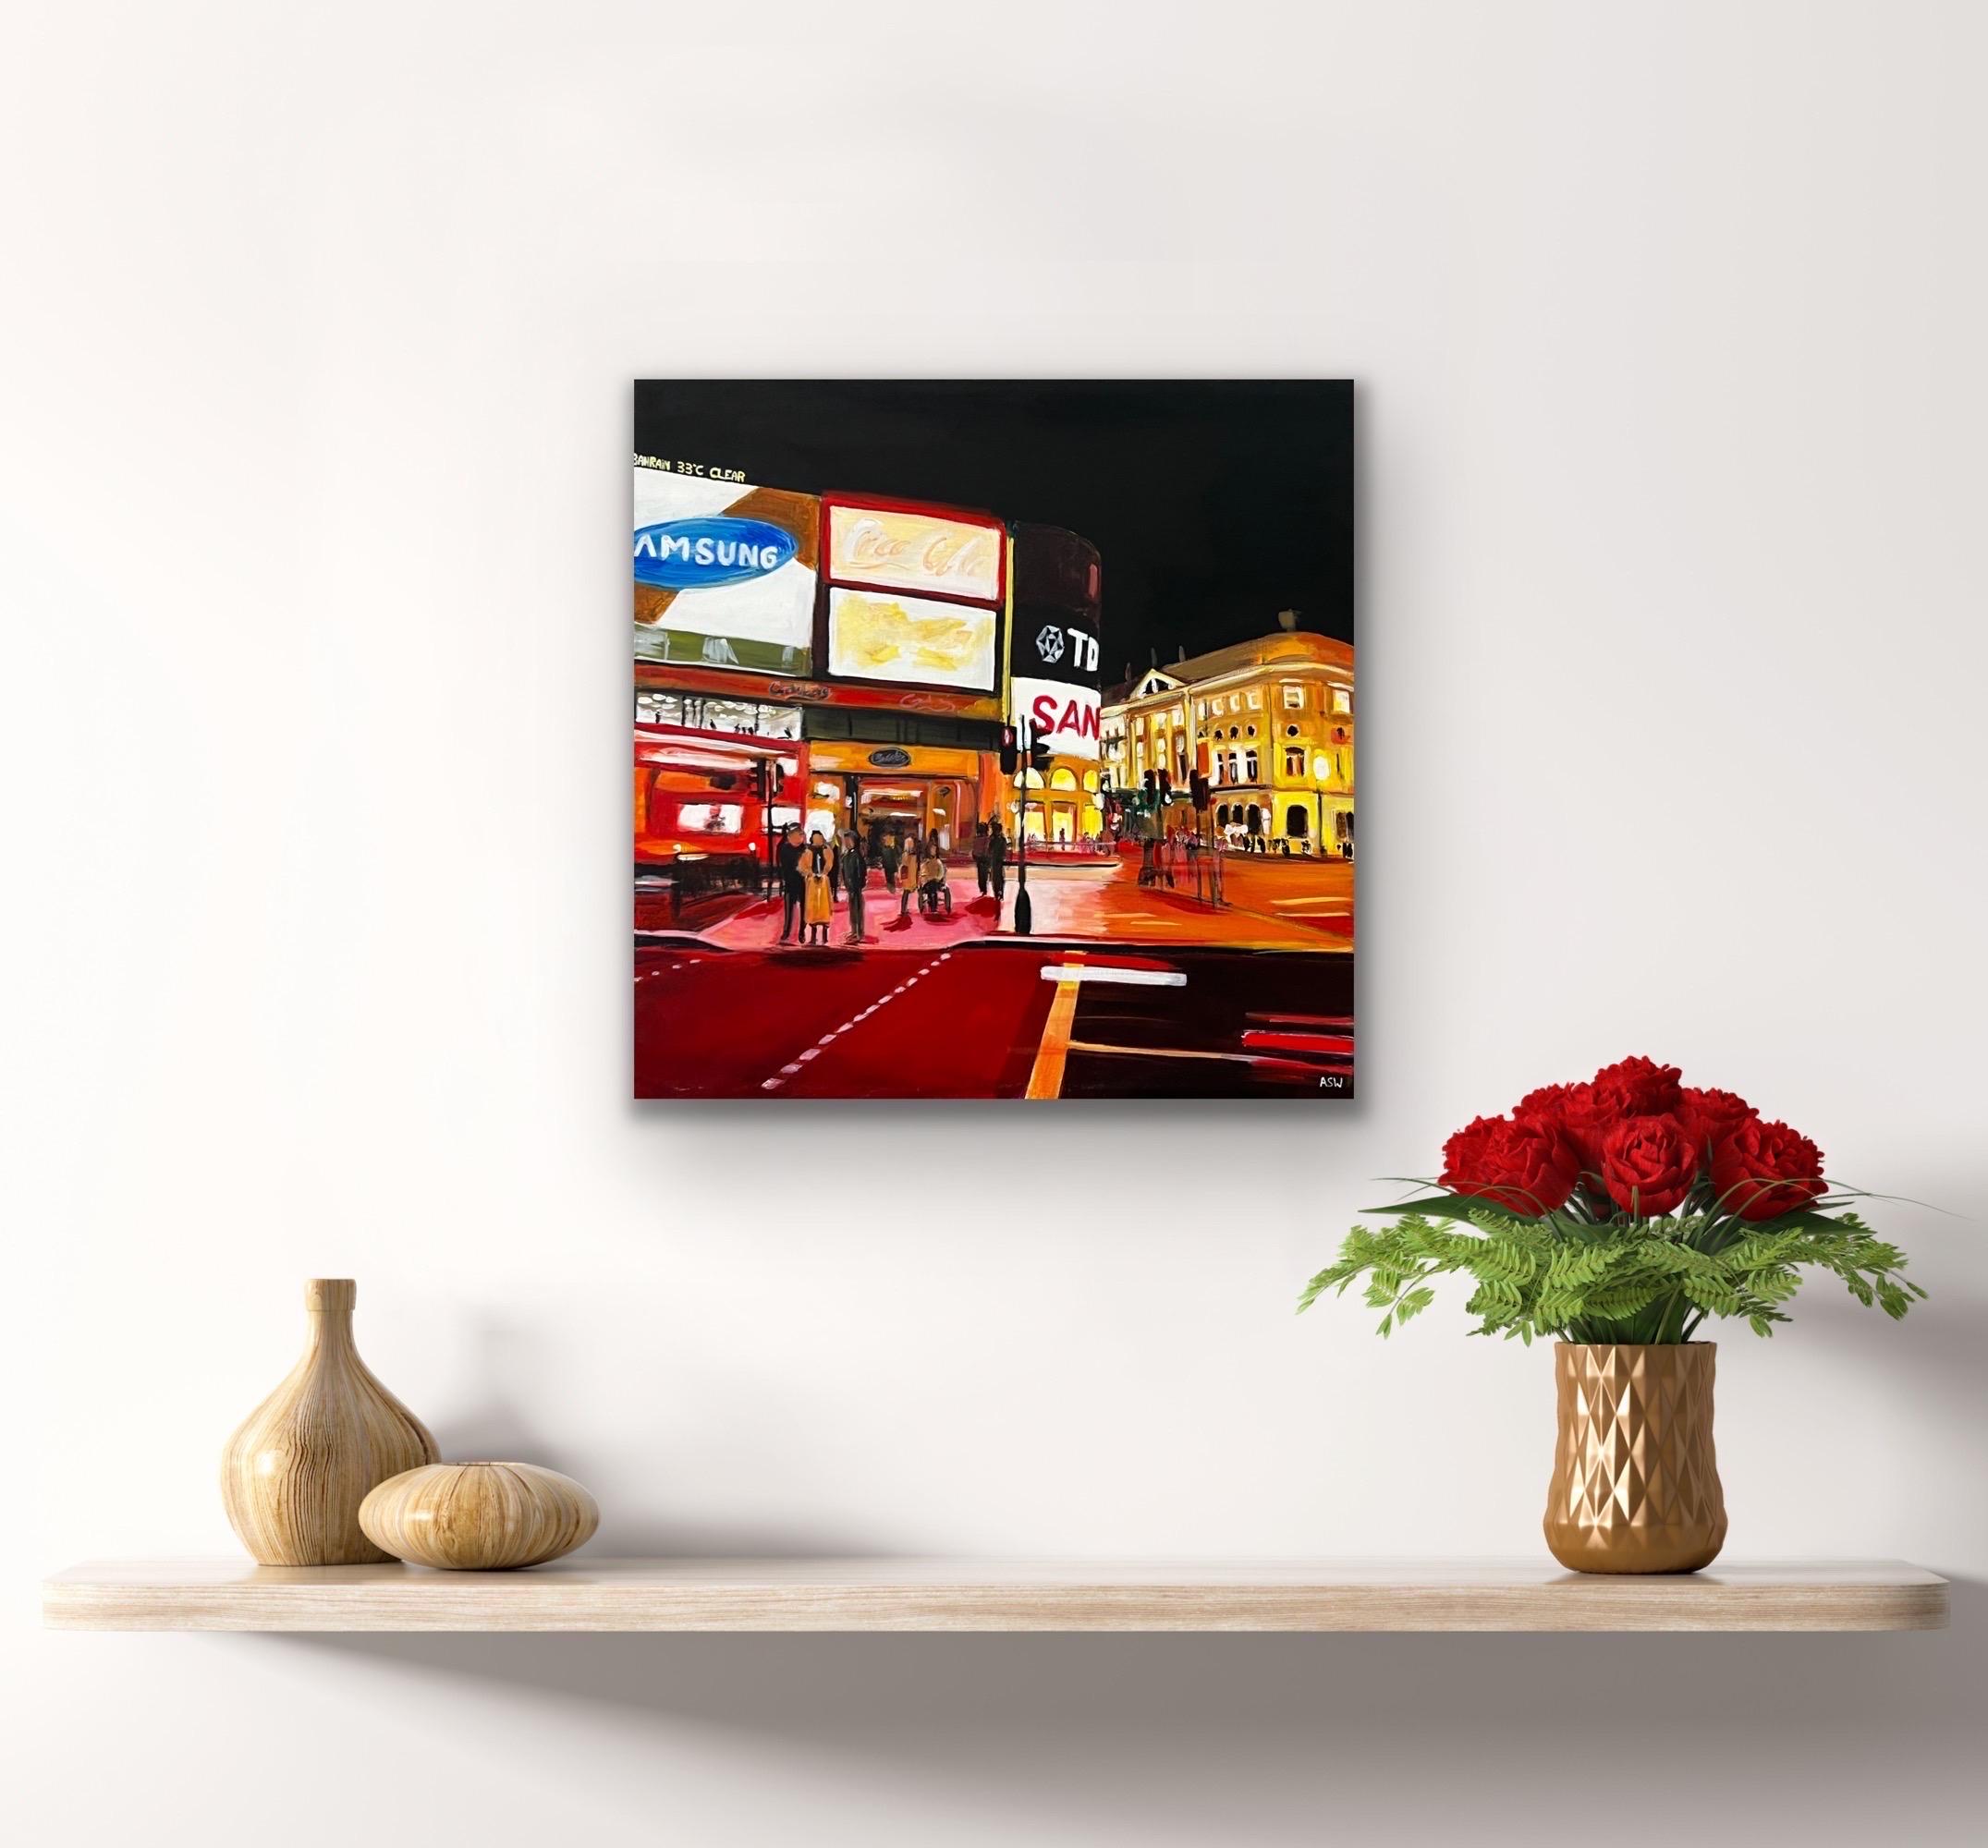 Piccadilly Circus in the City of London at Night with a Red London Bus, by Contemporary Urban Landscape Artist, Angela Wakefield

Art measures 24 x 24 inches (unframed) 
High quality Italian box canvas 

Angela Wakefield has produced numerous